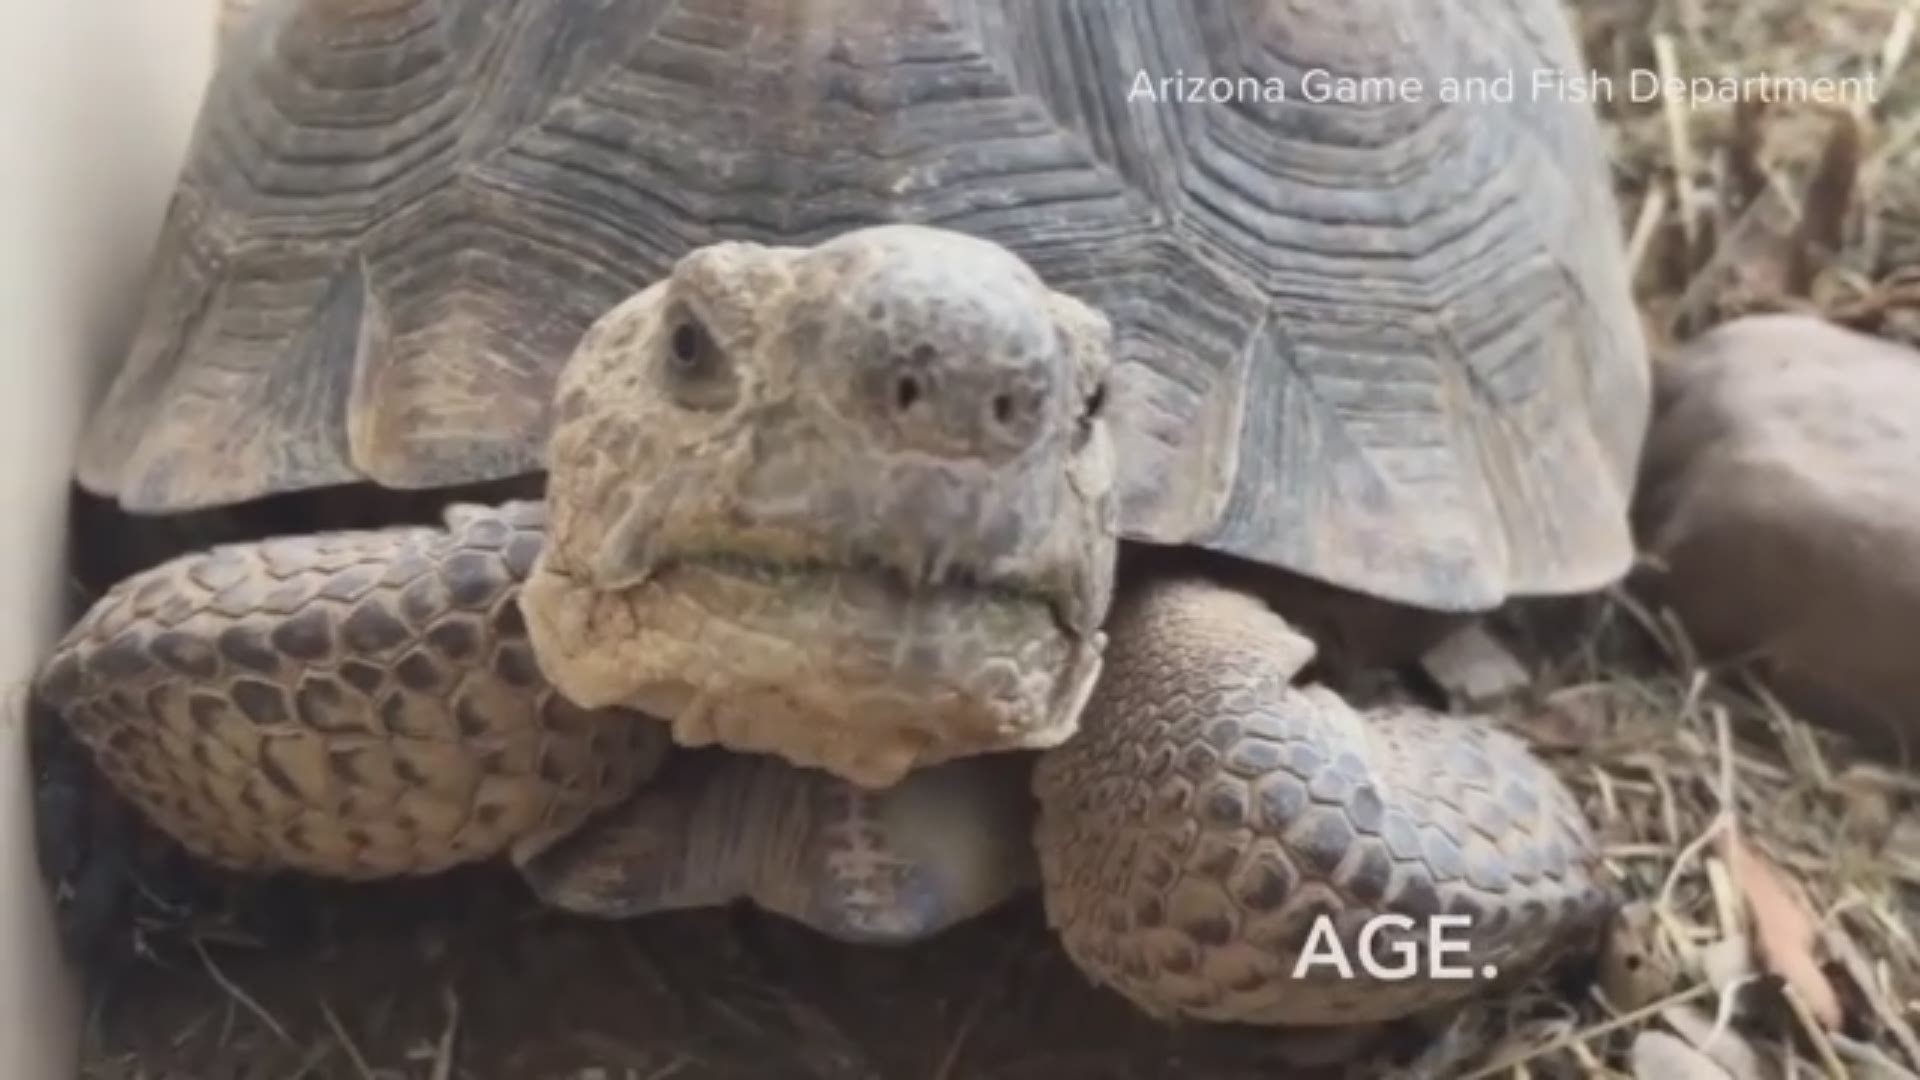 These tortoises cannot go back to the wild because they may transmit diseases that affect the wild desert tortoise population.